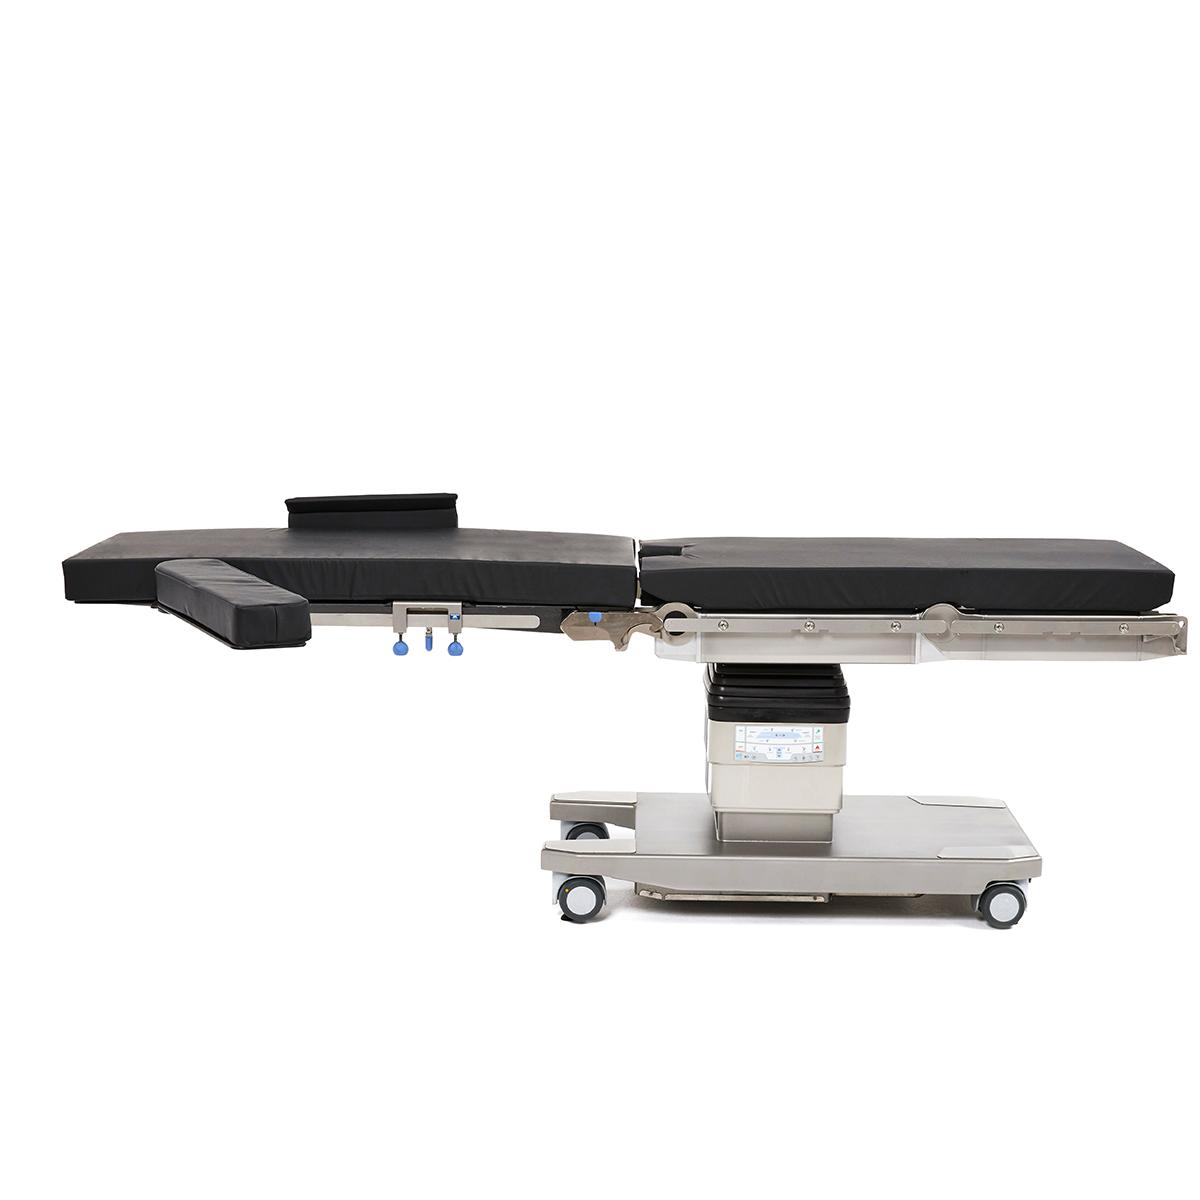 Hillrom surgical table equipped with vascular accessories for positioning patients.